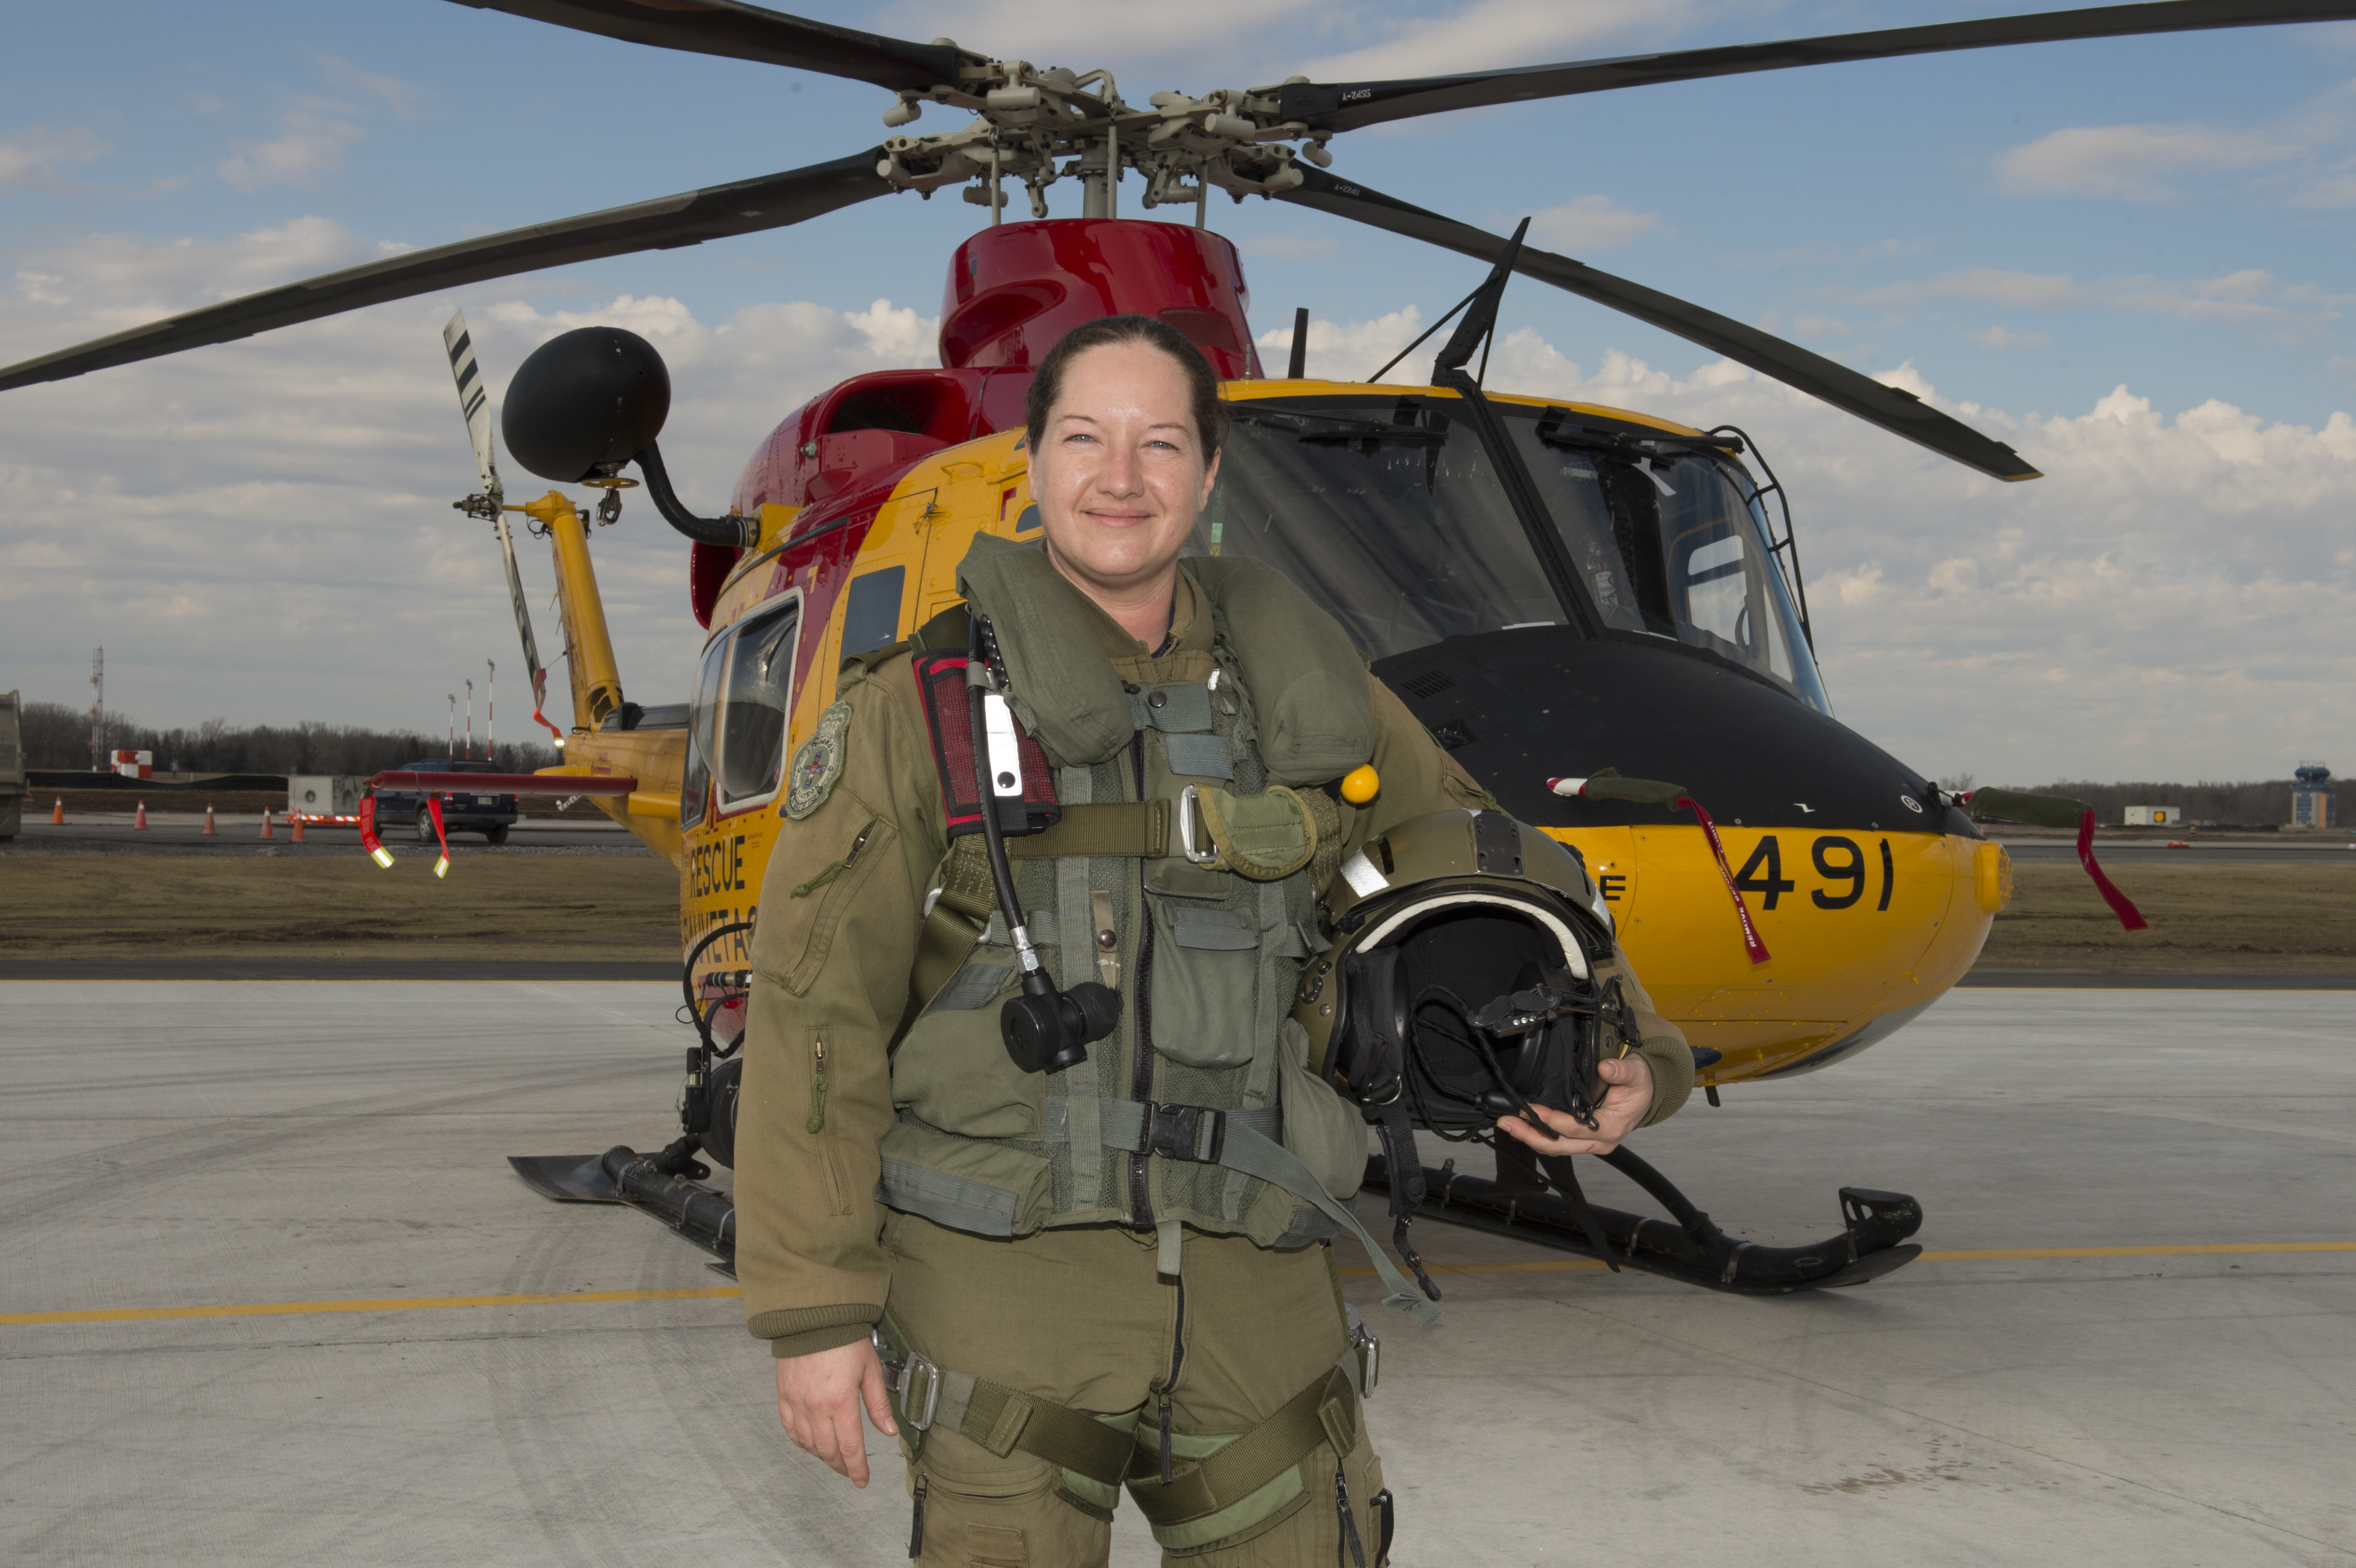 Master Corporal Jessie Bush, a flight engineer with 426 Squadron, returns from hoist training during a search and rescue exercise on February 28, 2018, in Hamilton, Ontario. PHOTO: Ordinary Seaman Paul Green